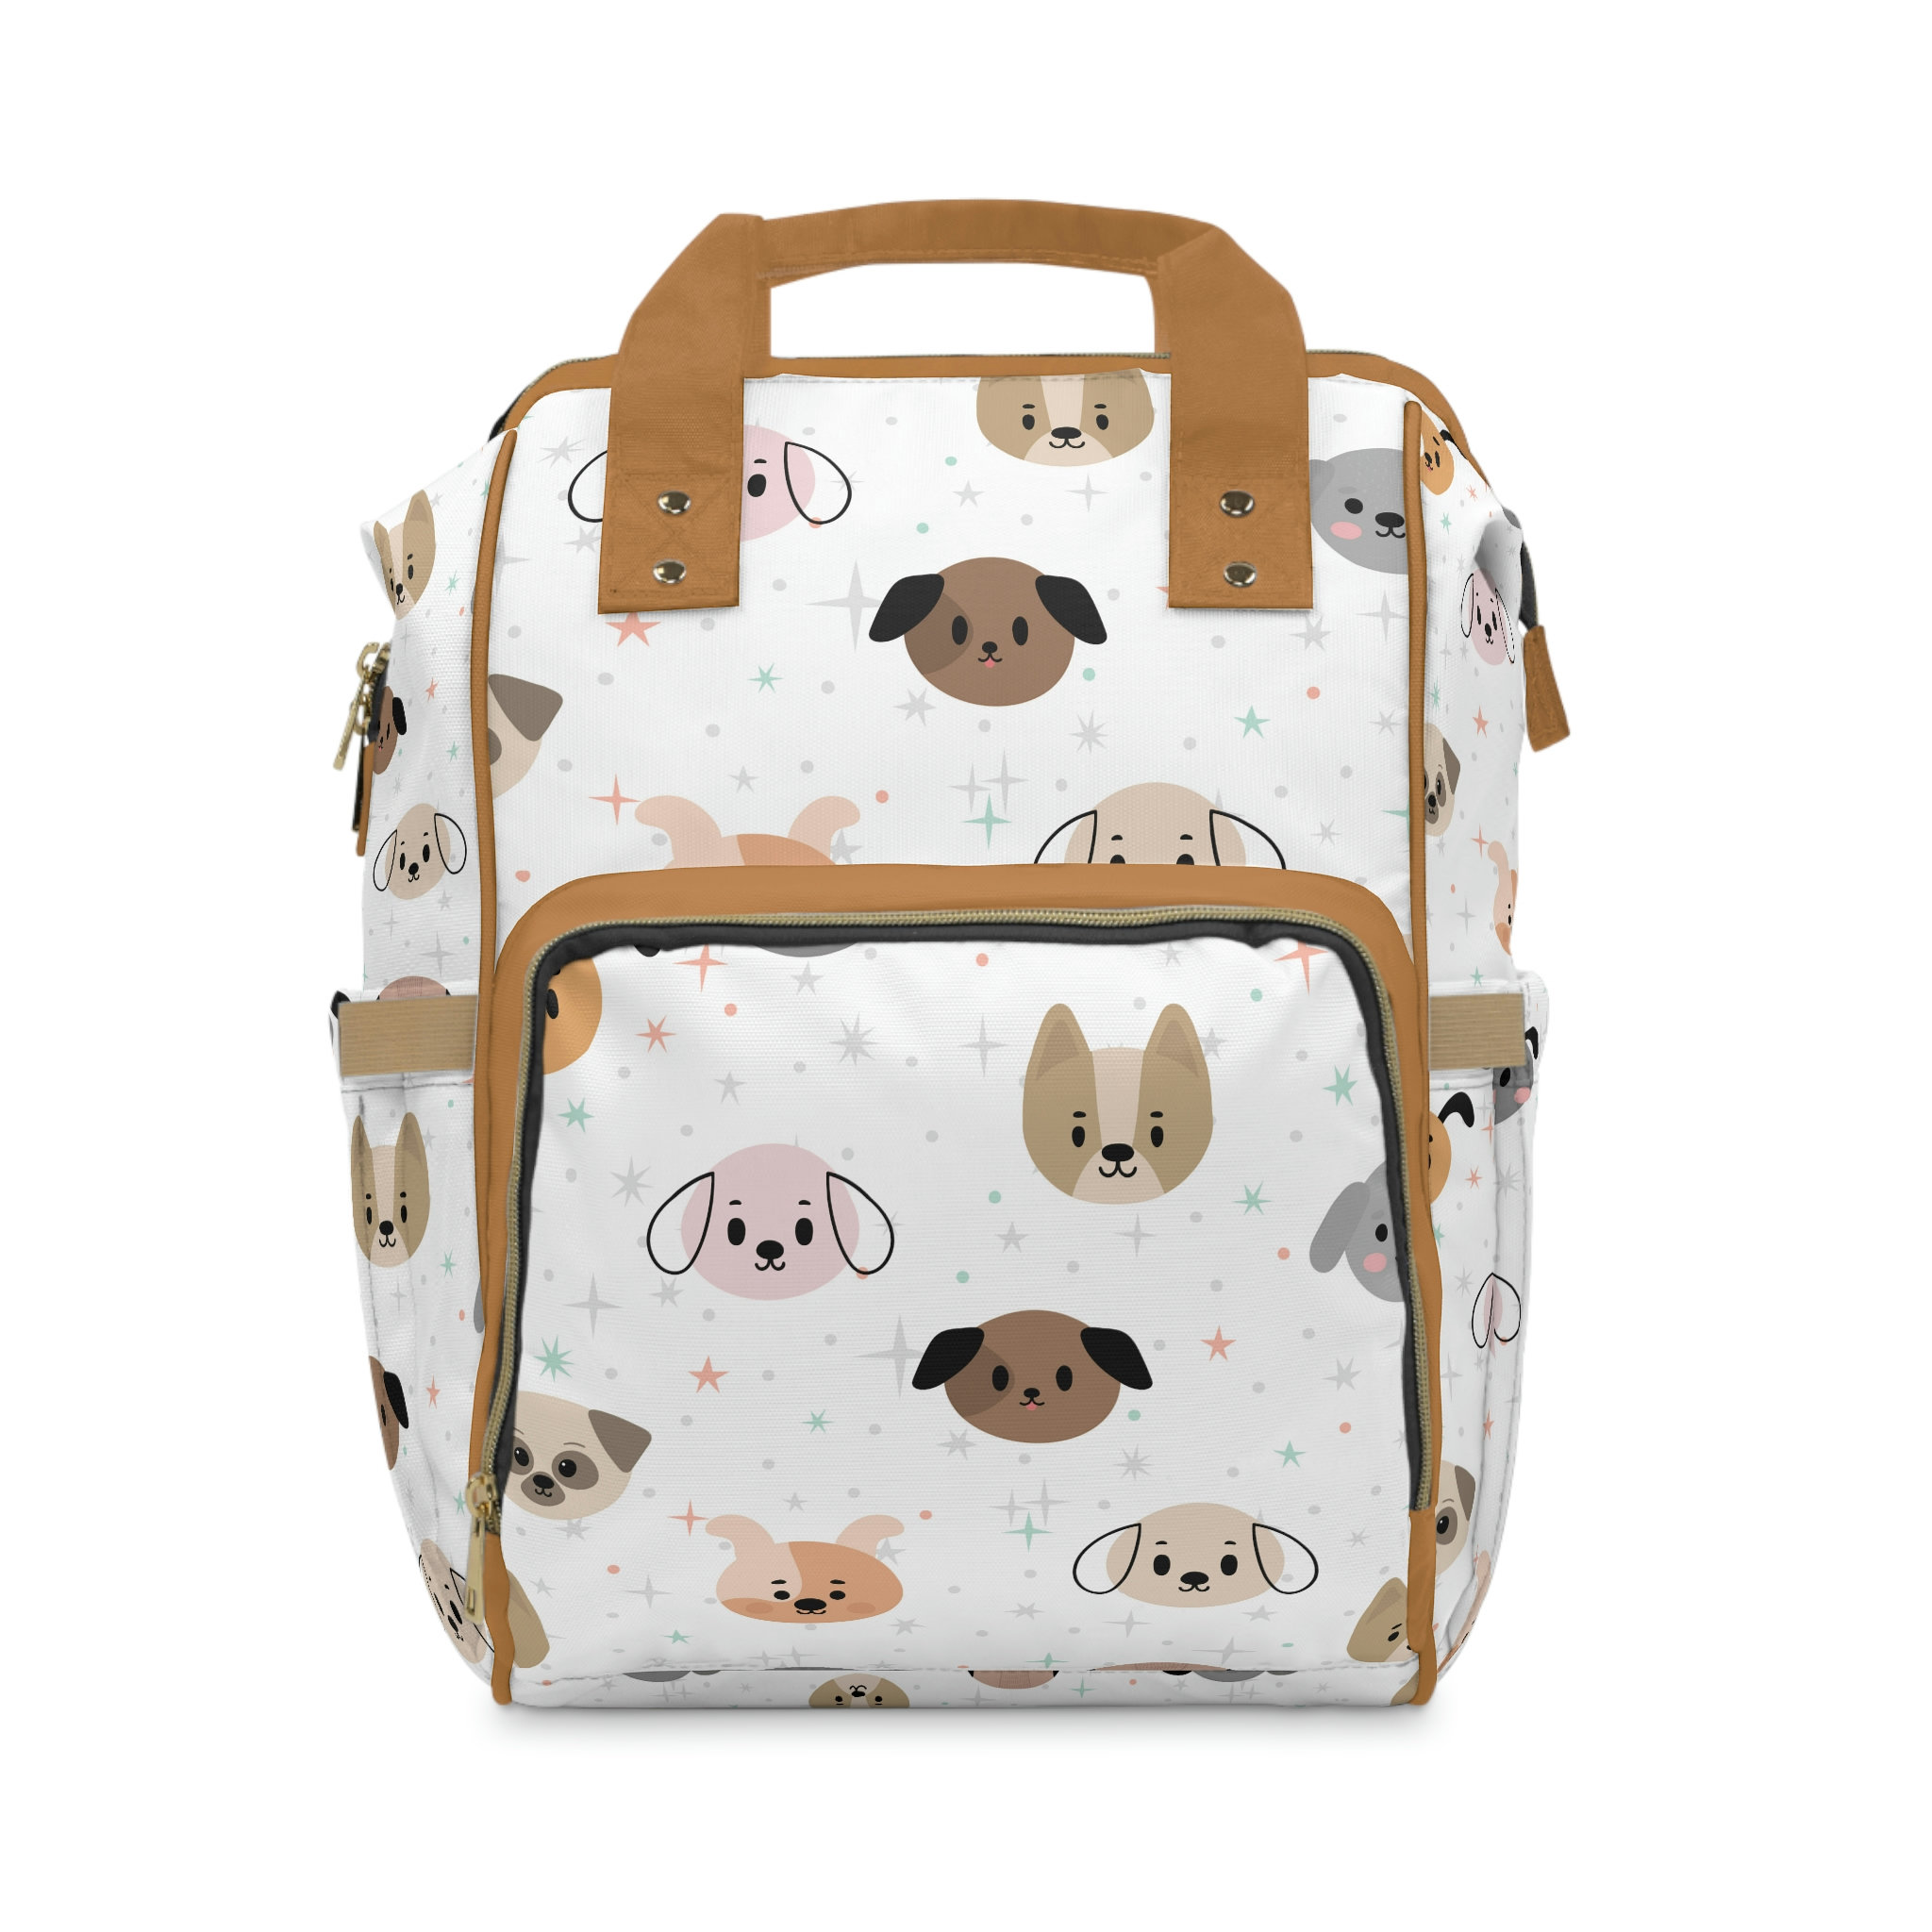  Vintage Dog Paw Print Diaper Bag Tote with Stroller Straps,  Animal Footprint Large Travel Diaper Tote Bag Baby Bag Multifunction Nappy  Bags for Mom and Dad : Baby